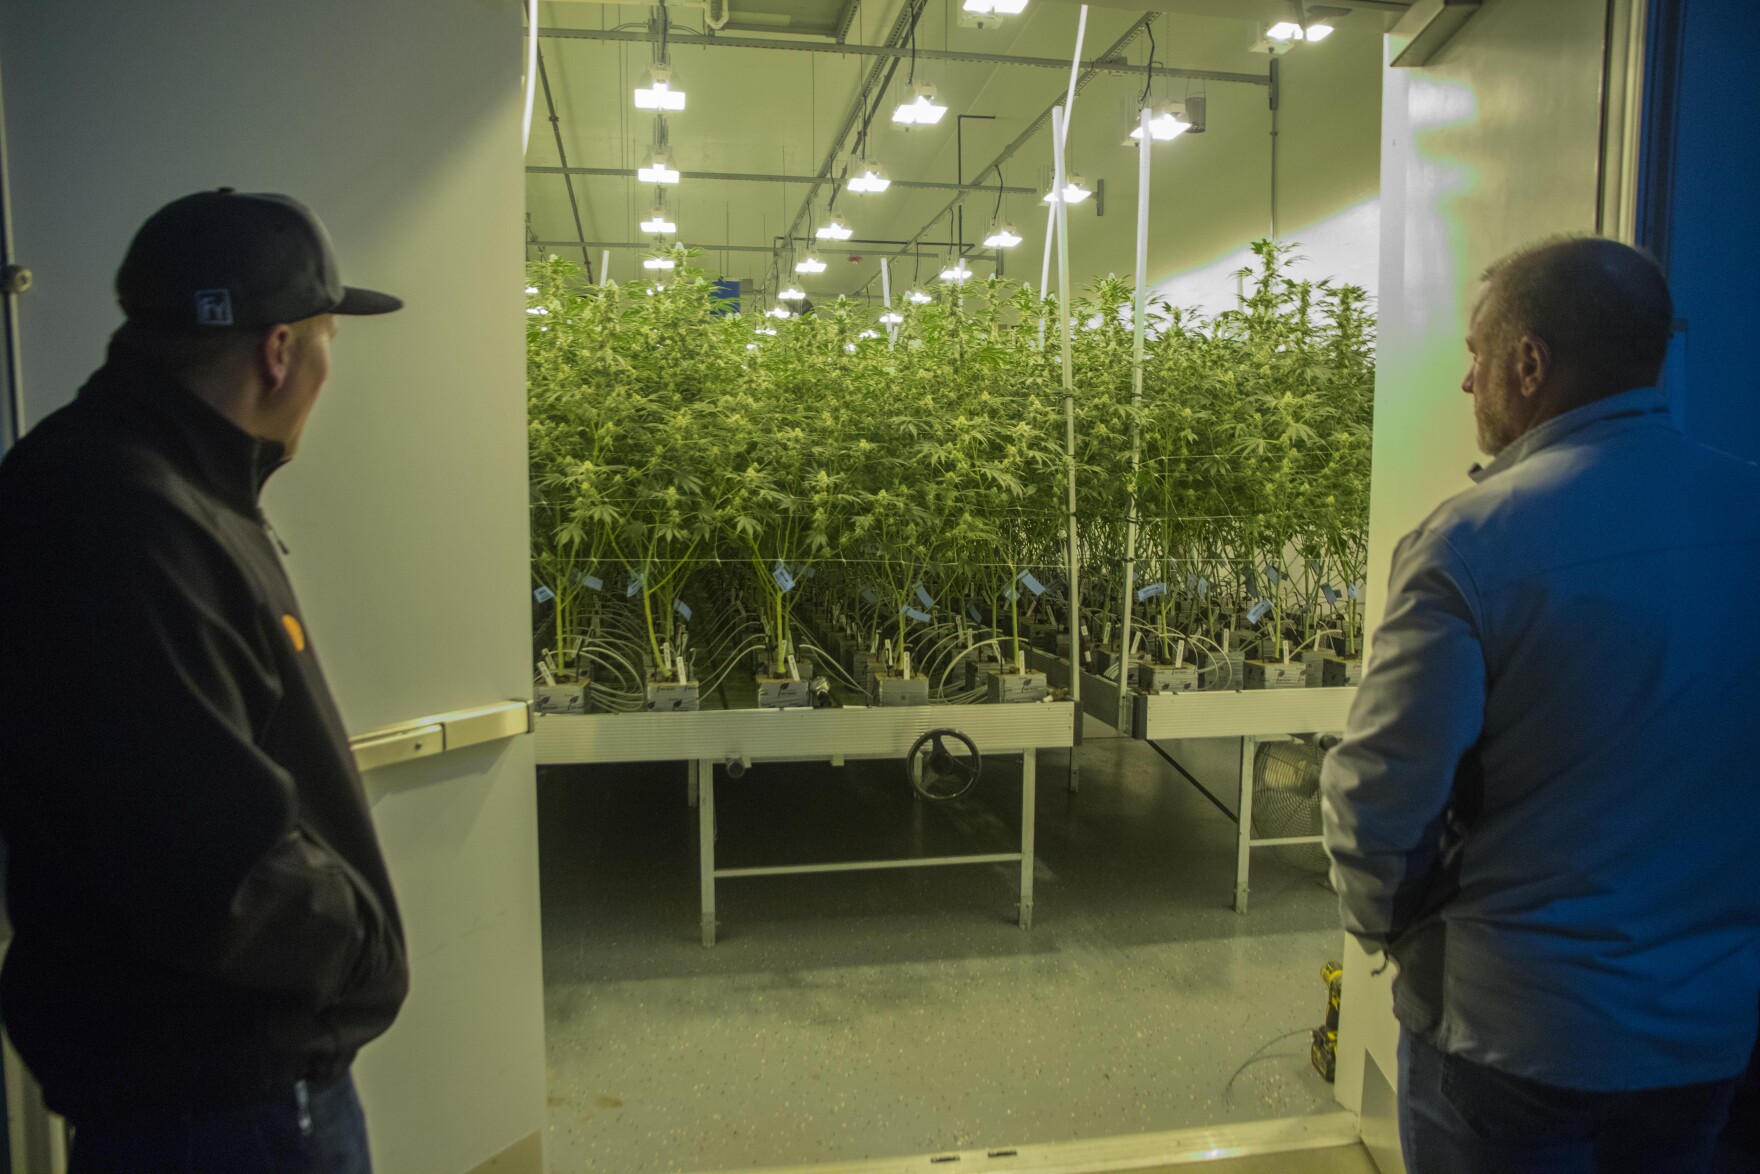 two men stand outside the doors of a warehouse. inside are rows and rows of growing marijuana